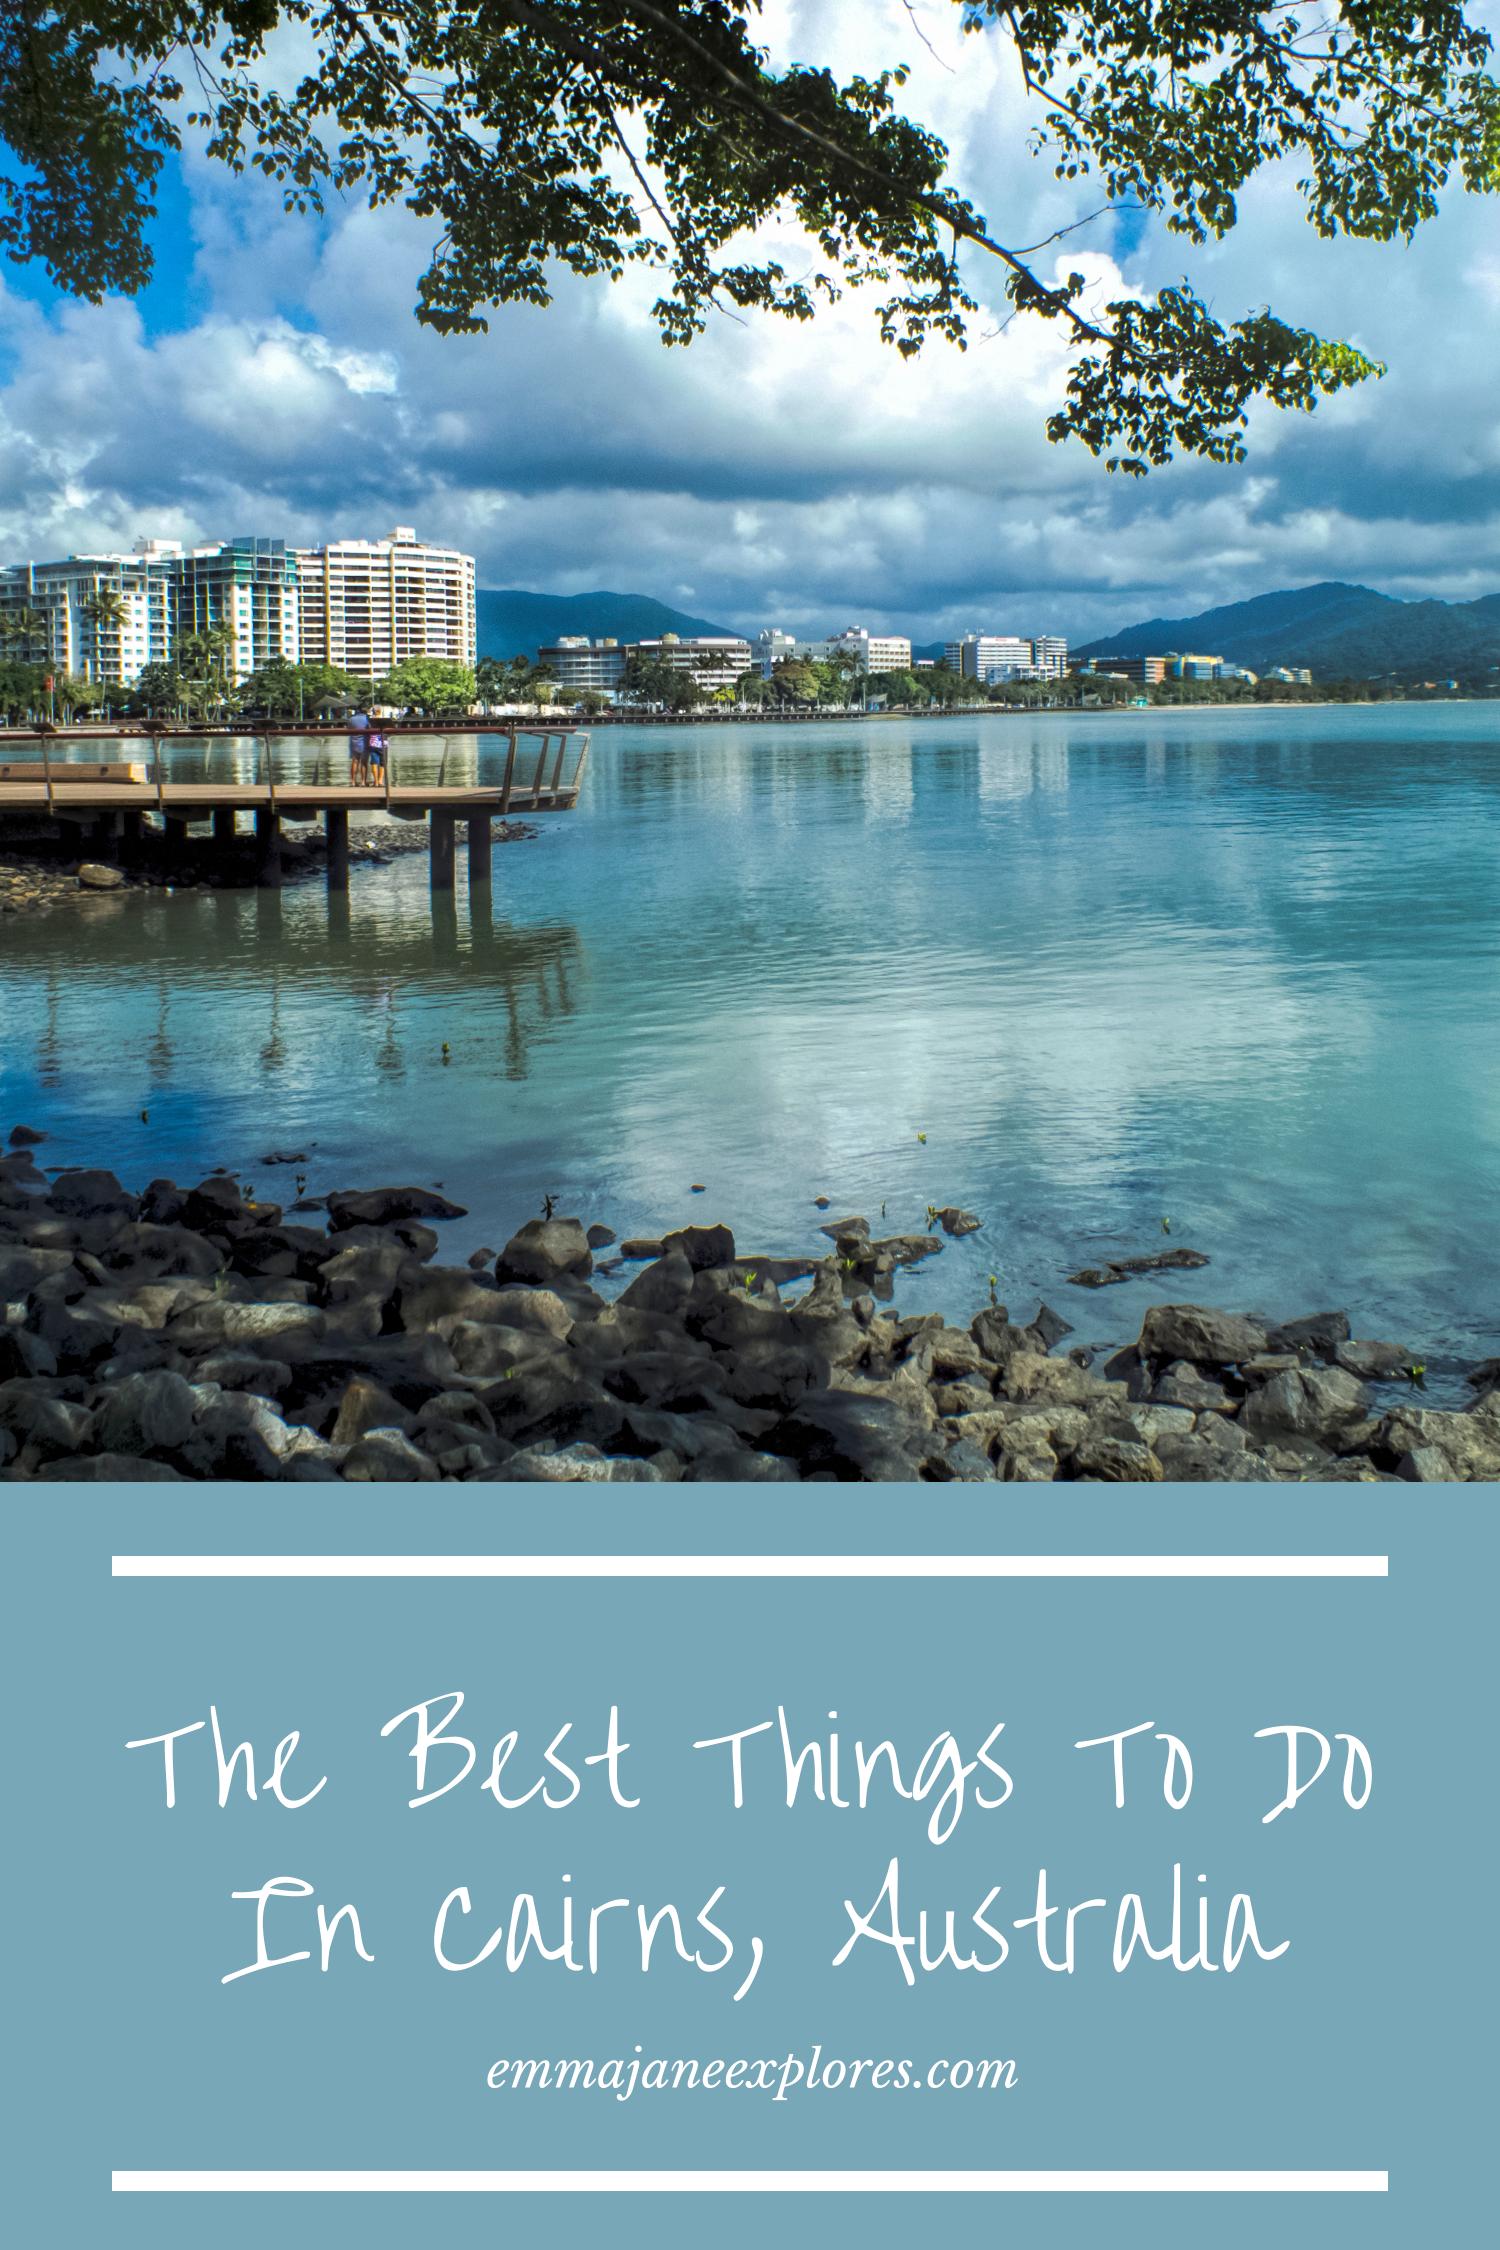 Coffee in Cairns and Other Things To Do - Emma Jane Explores